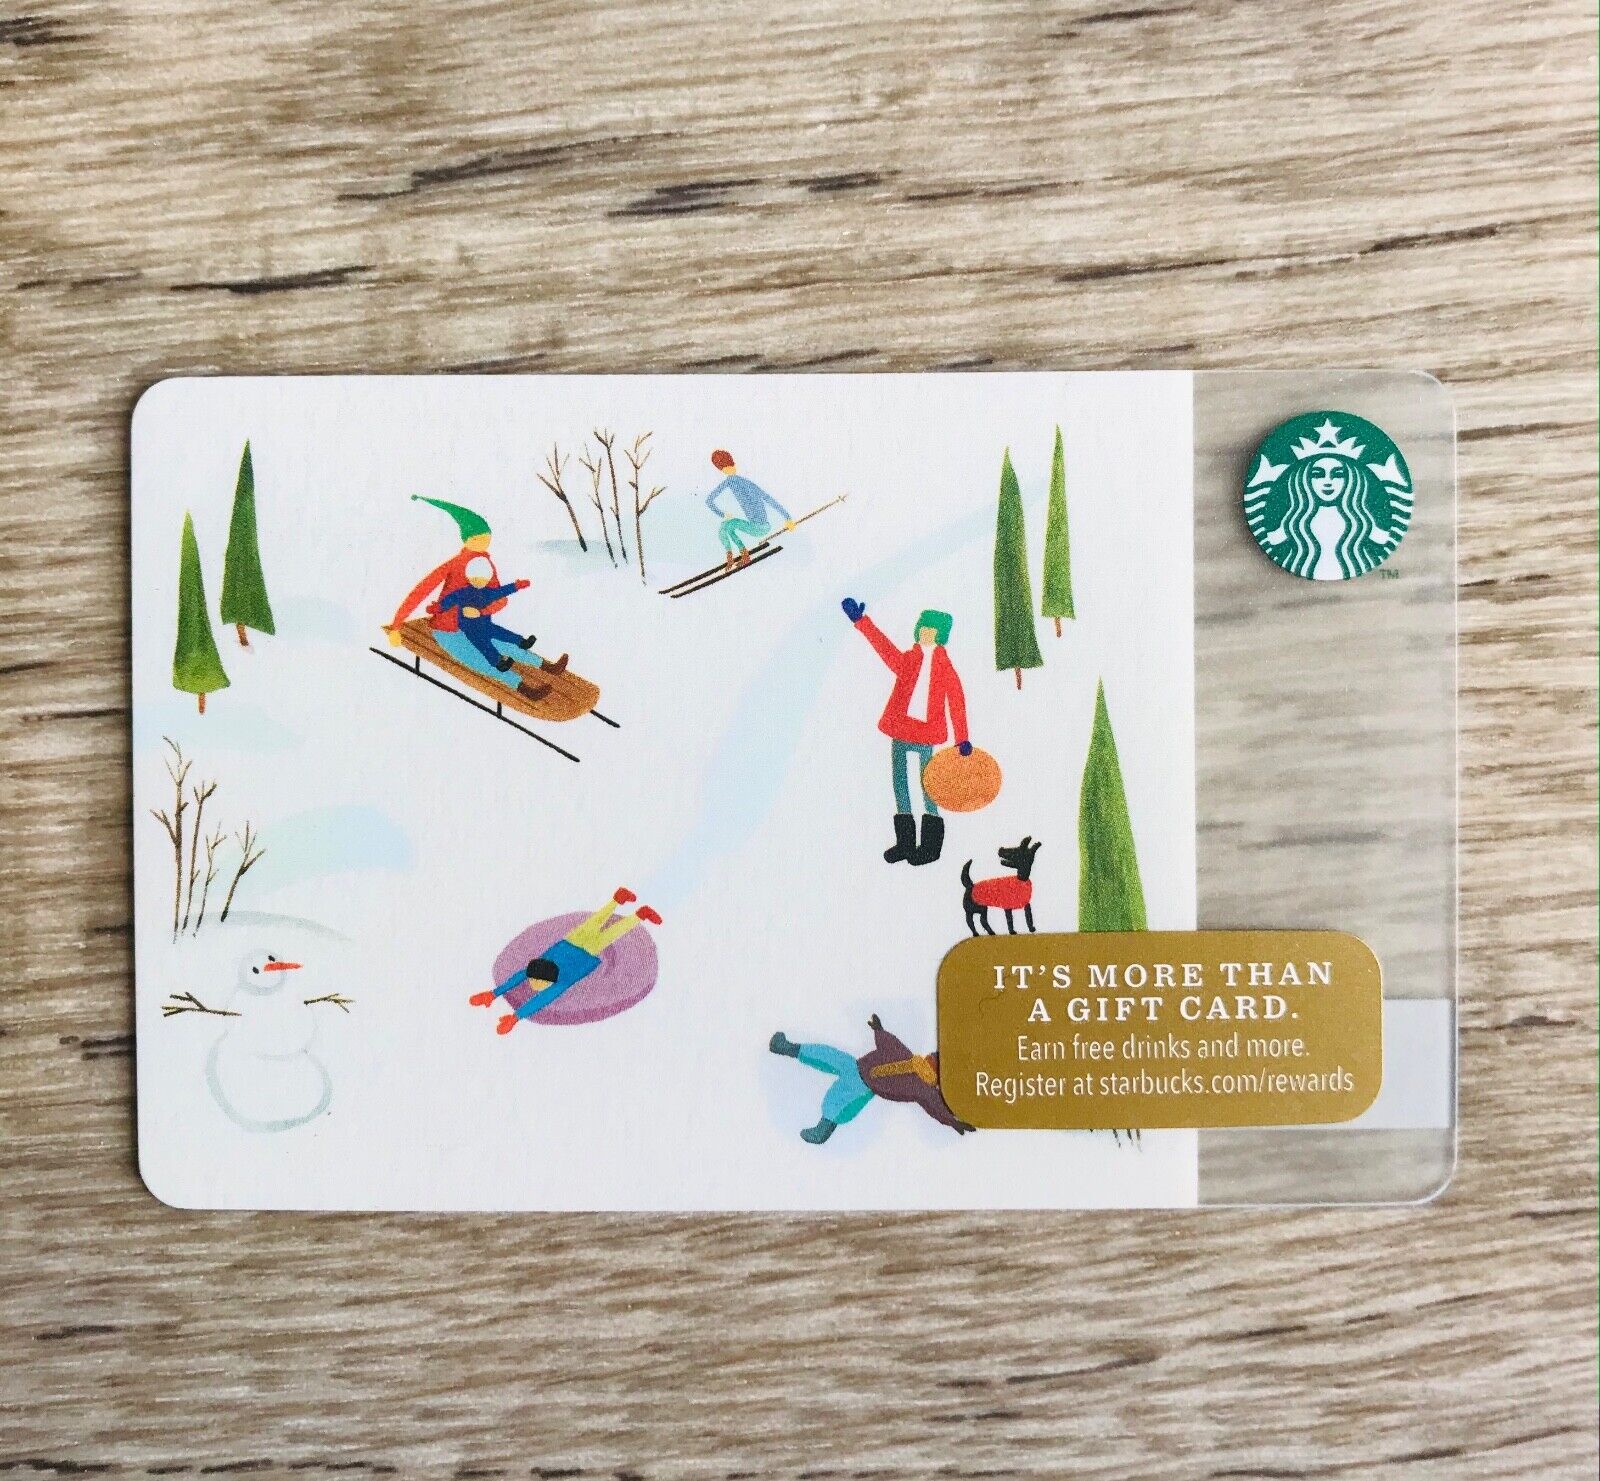 2014 STARBUCKS HOLIDAY GIFT CARD NEW-Choose one or more